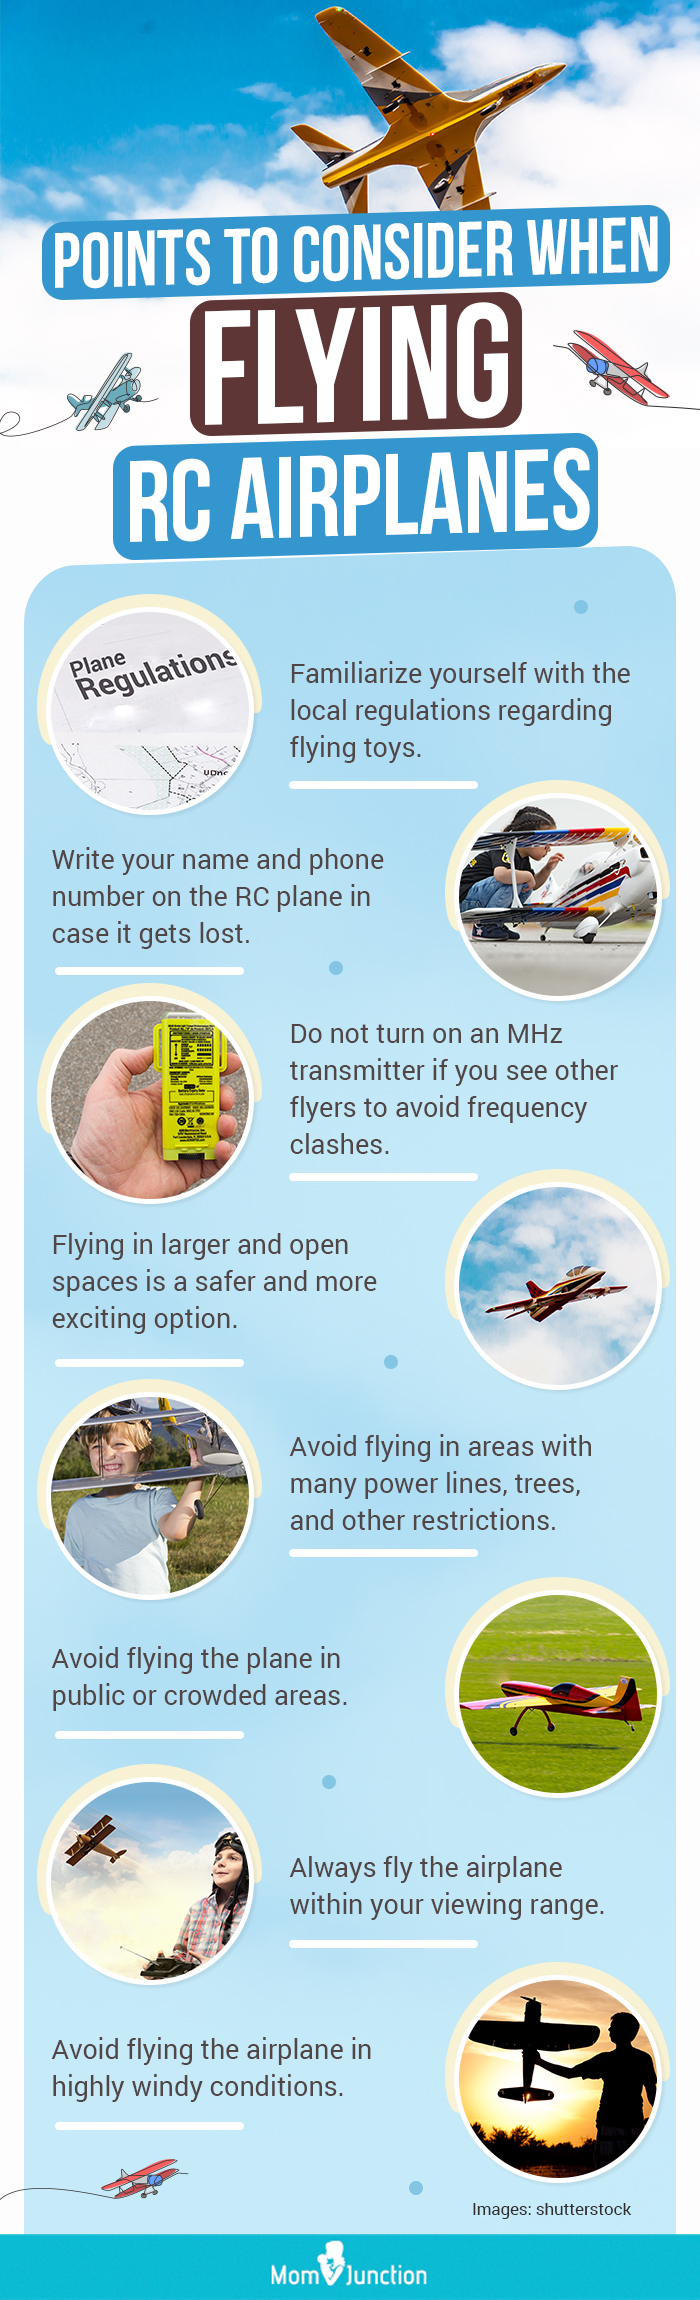 Points To Consider When Flying RC Airplanes (infographic)